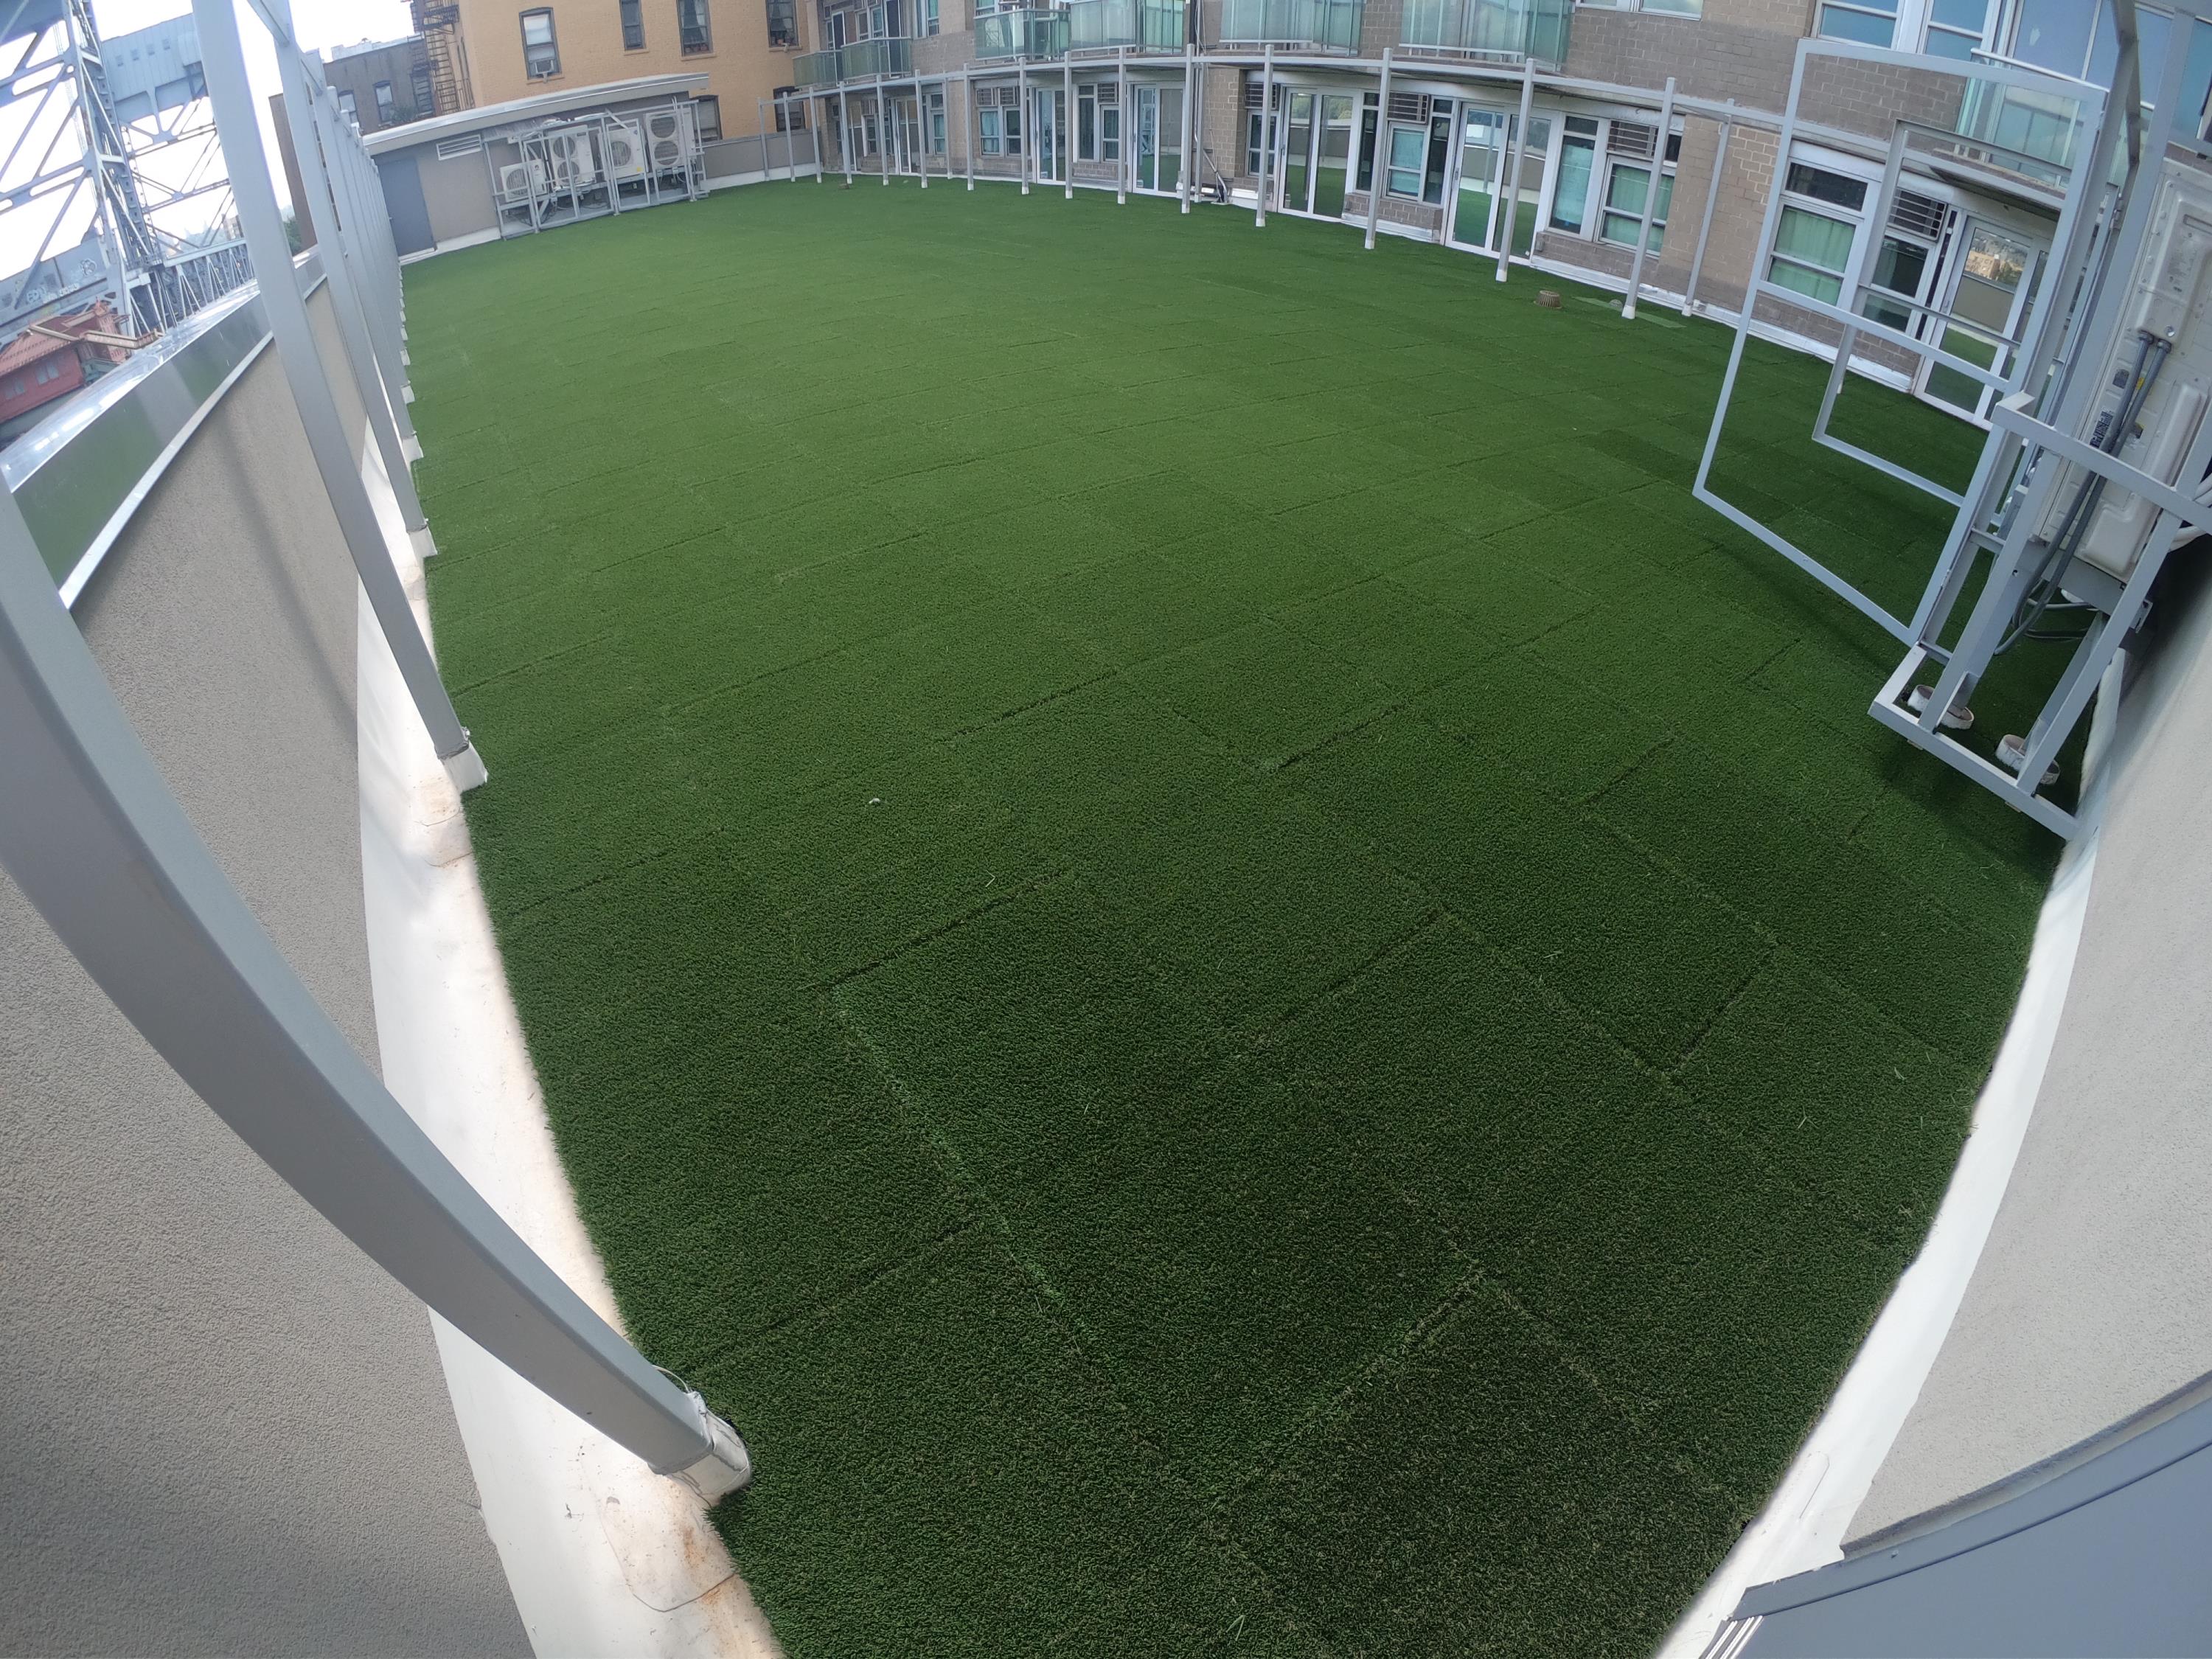 After Image of 3,000 sq. ft. Rooftop using our 2" Thick Turf Tiles